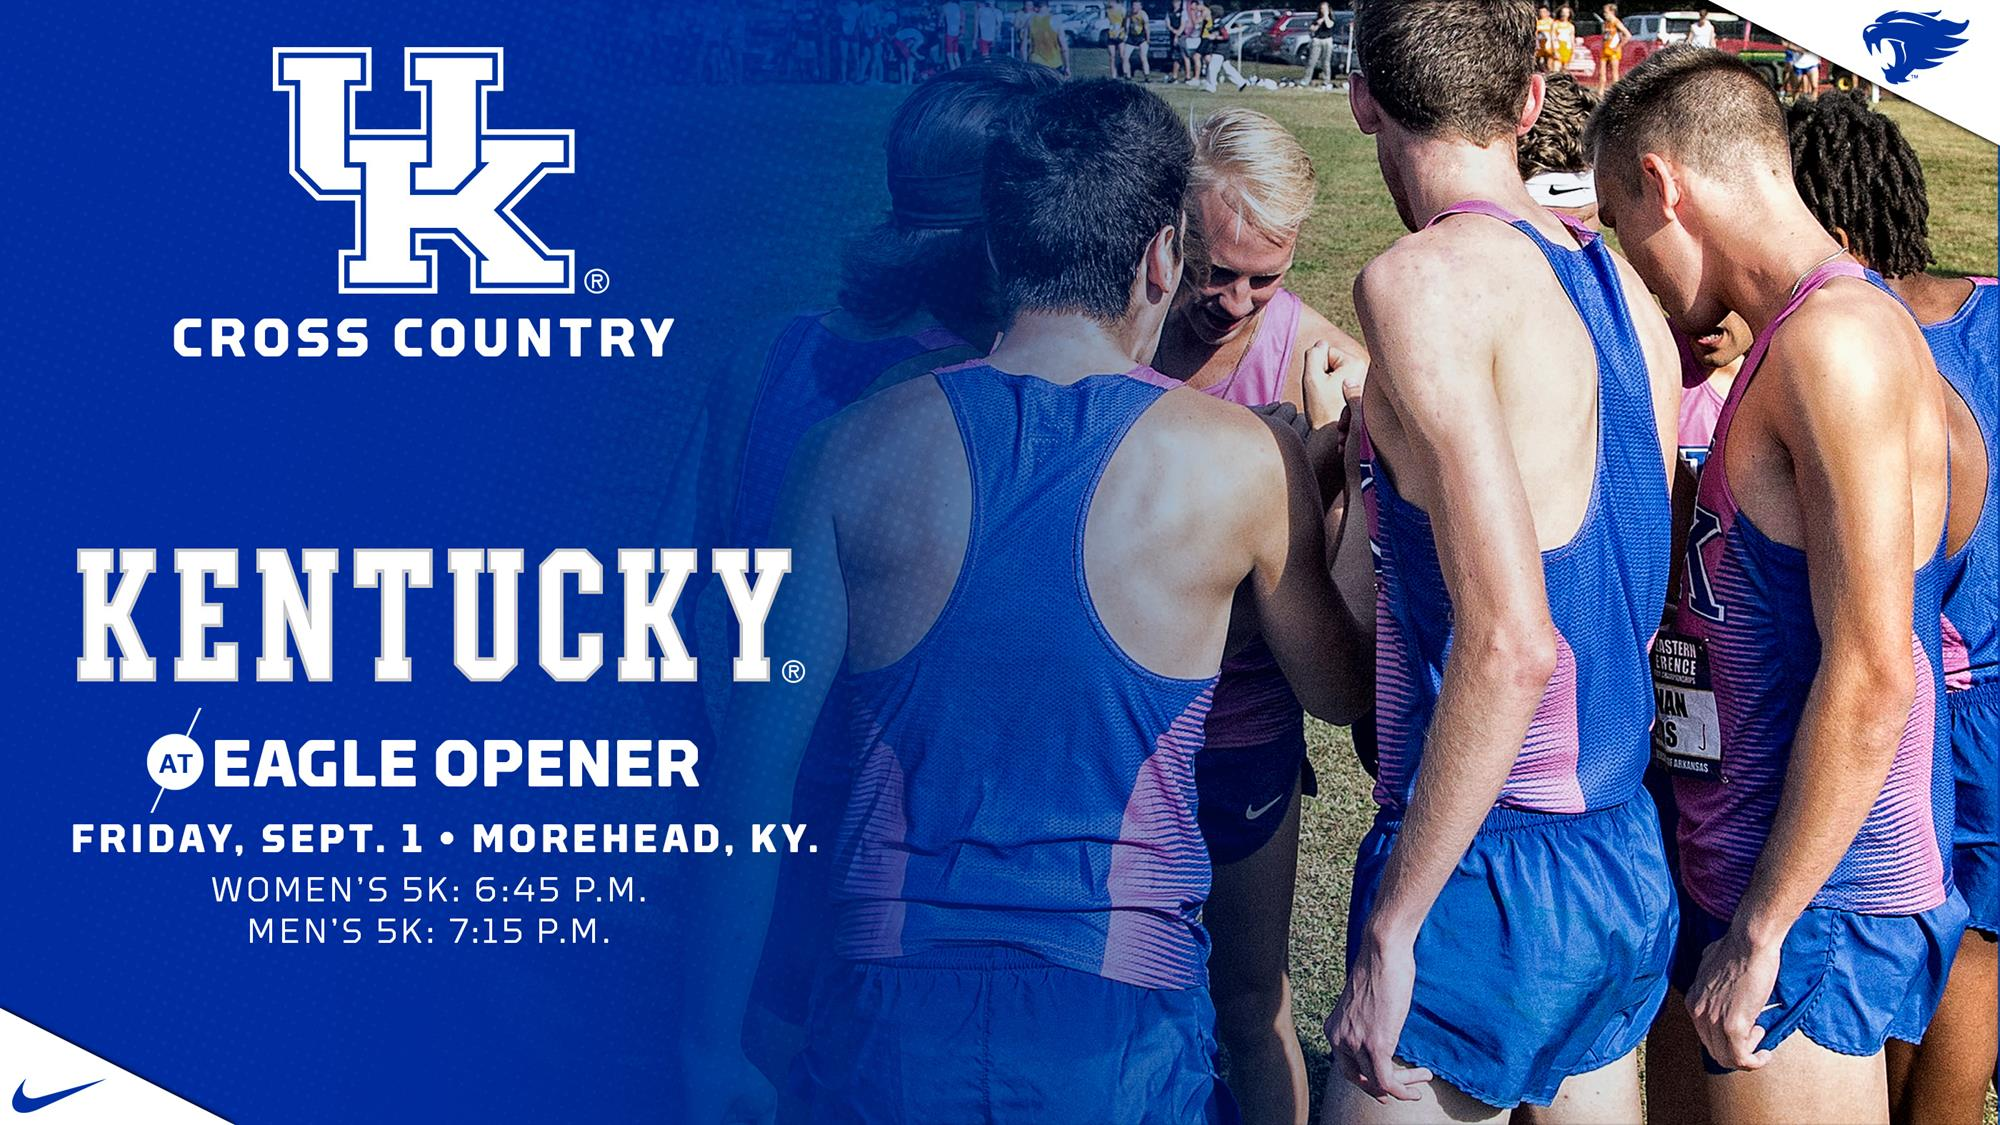 UK Cross Country to Begin 2017 at Eagle Opener